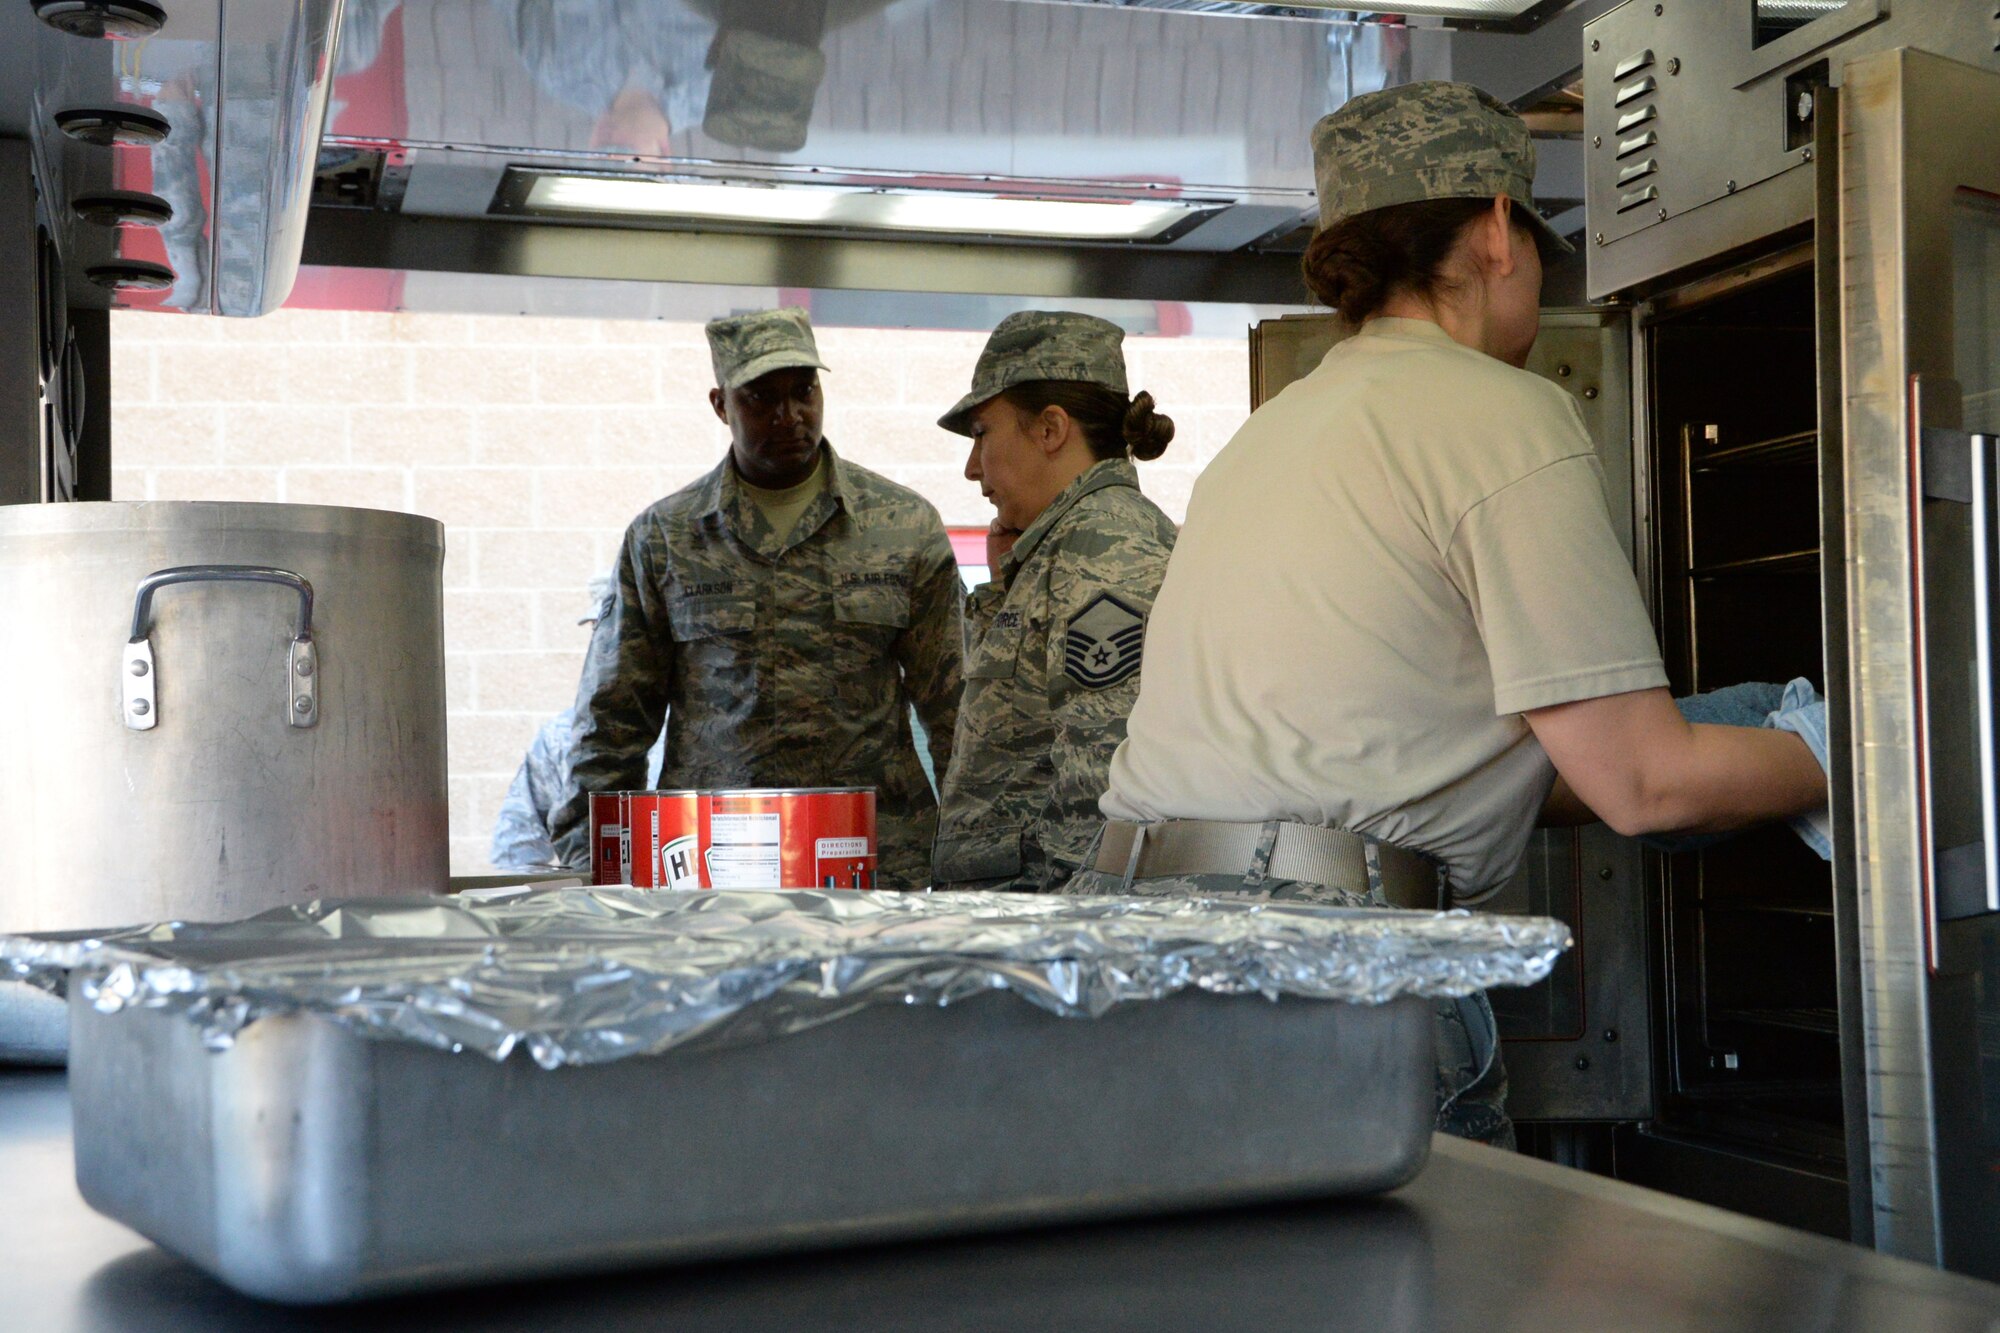 U.S. Air Force Airmen with the 123rd Air Wing, Kentucky Air National Guard, assist and train 181st Intelligence Wing Services Flight Airmen on the use of a Disaster Relief Mobile Kitchen Trailer at Hulman Field, Terre Haute, Ind., Sept. 13, 2015. (U.S. Air National Guard photo by Airman 1st Class Kevin D. Schulze/Released) 